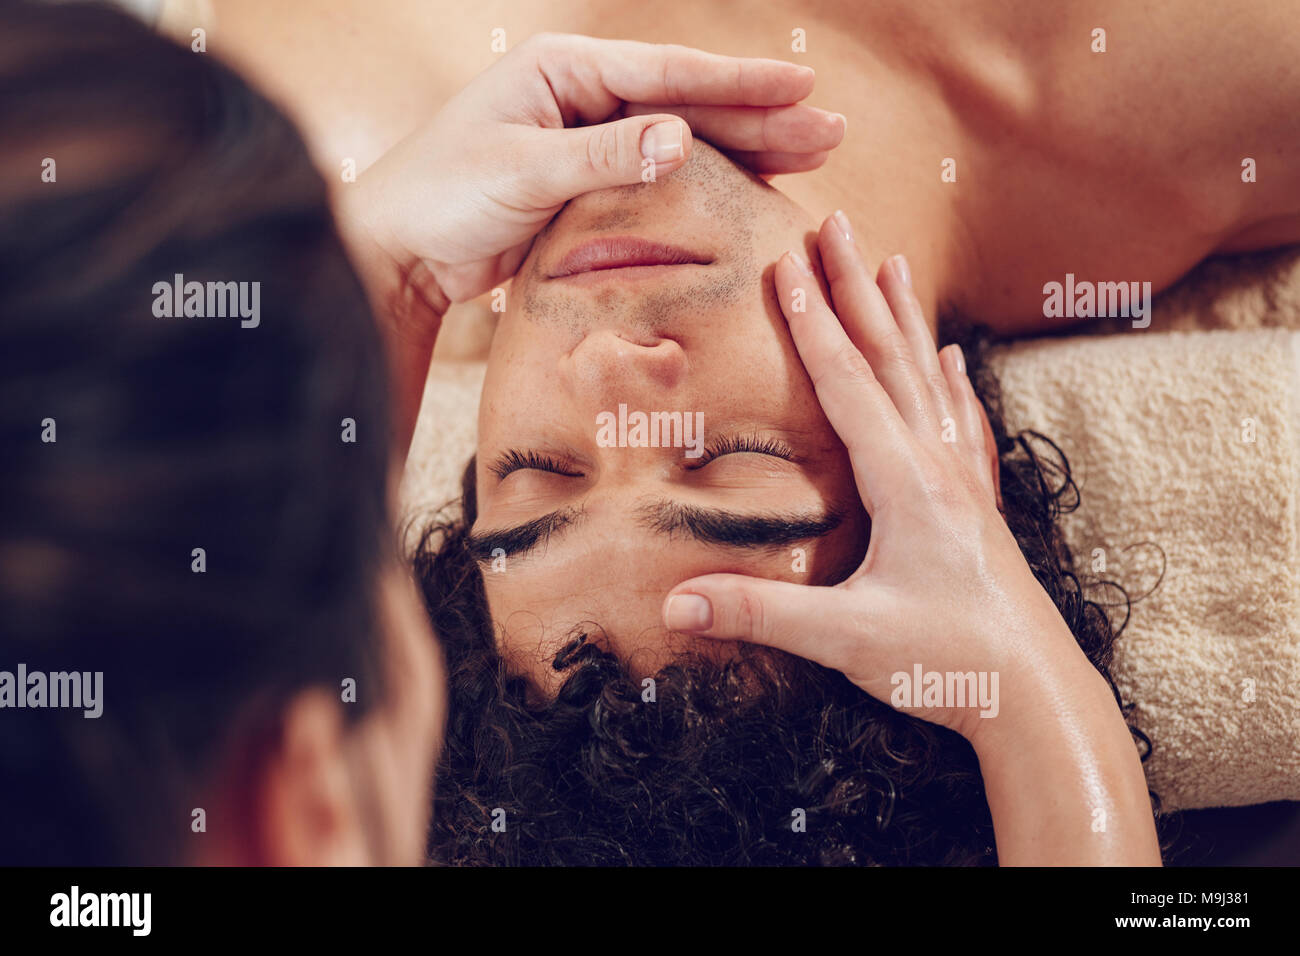 Close-up of a handsome healthy young man enjoying relaxing facial massage at beauty salon. Top view. Stock Photo